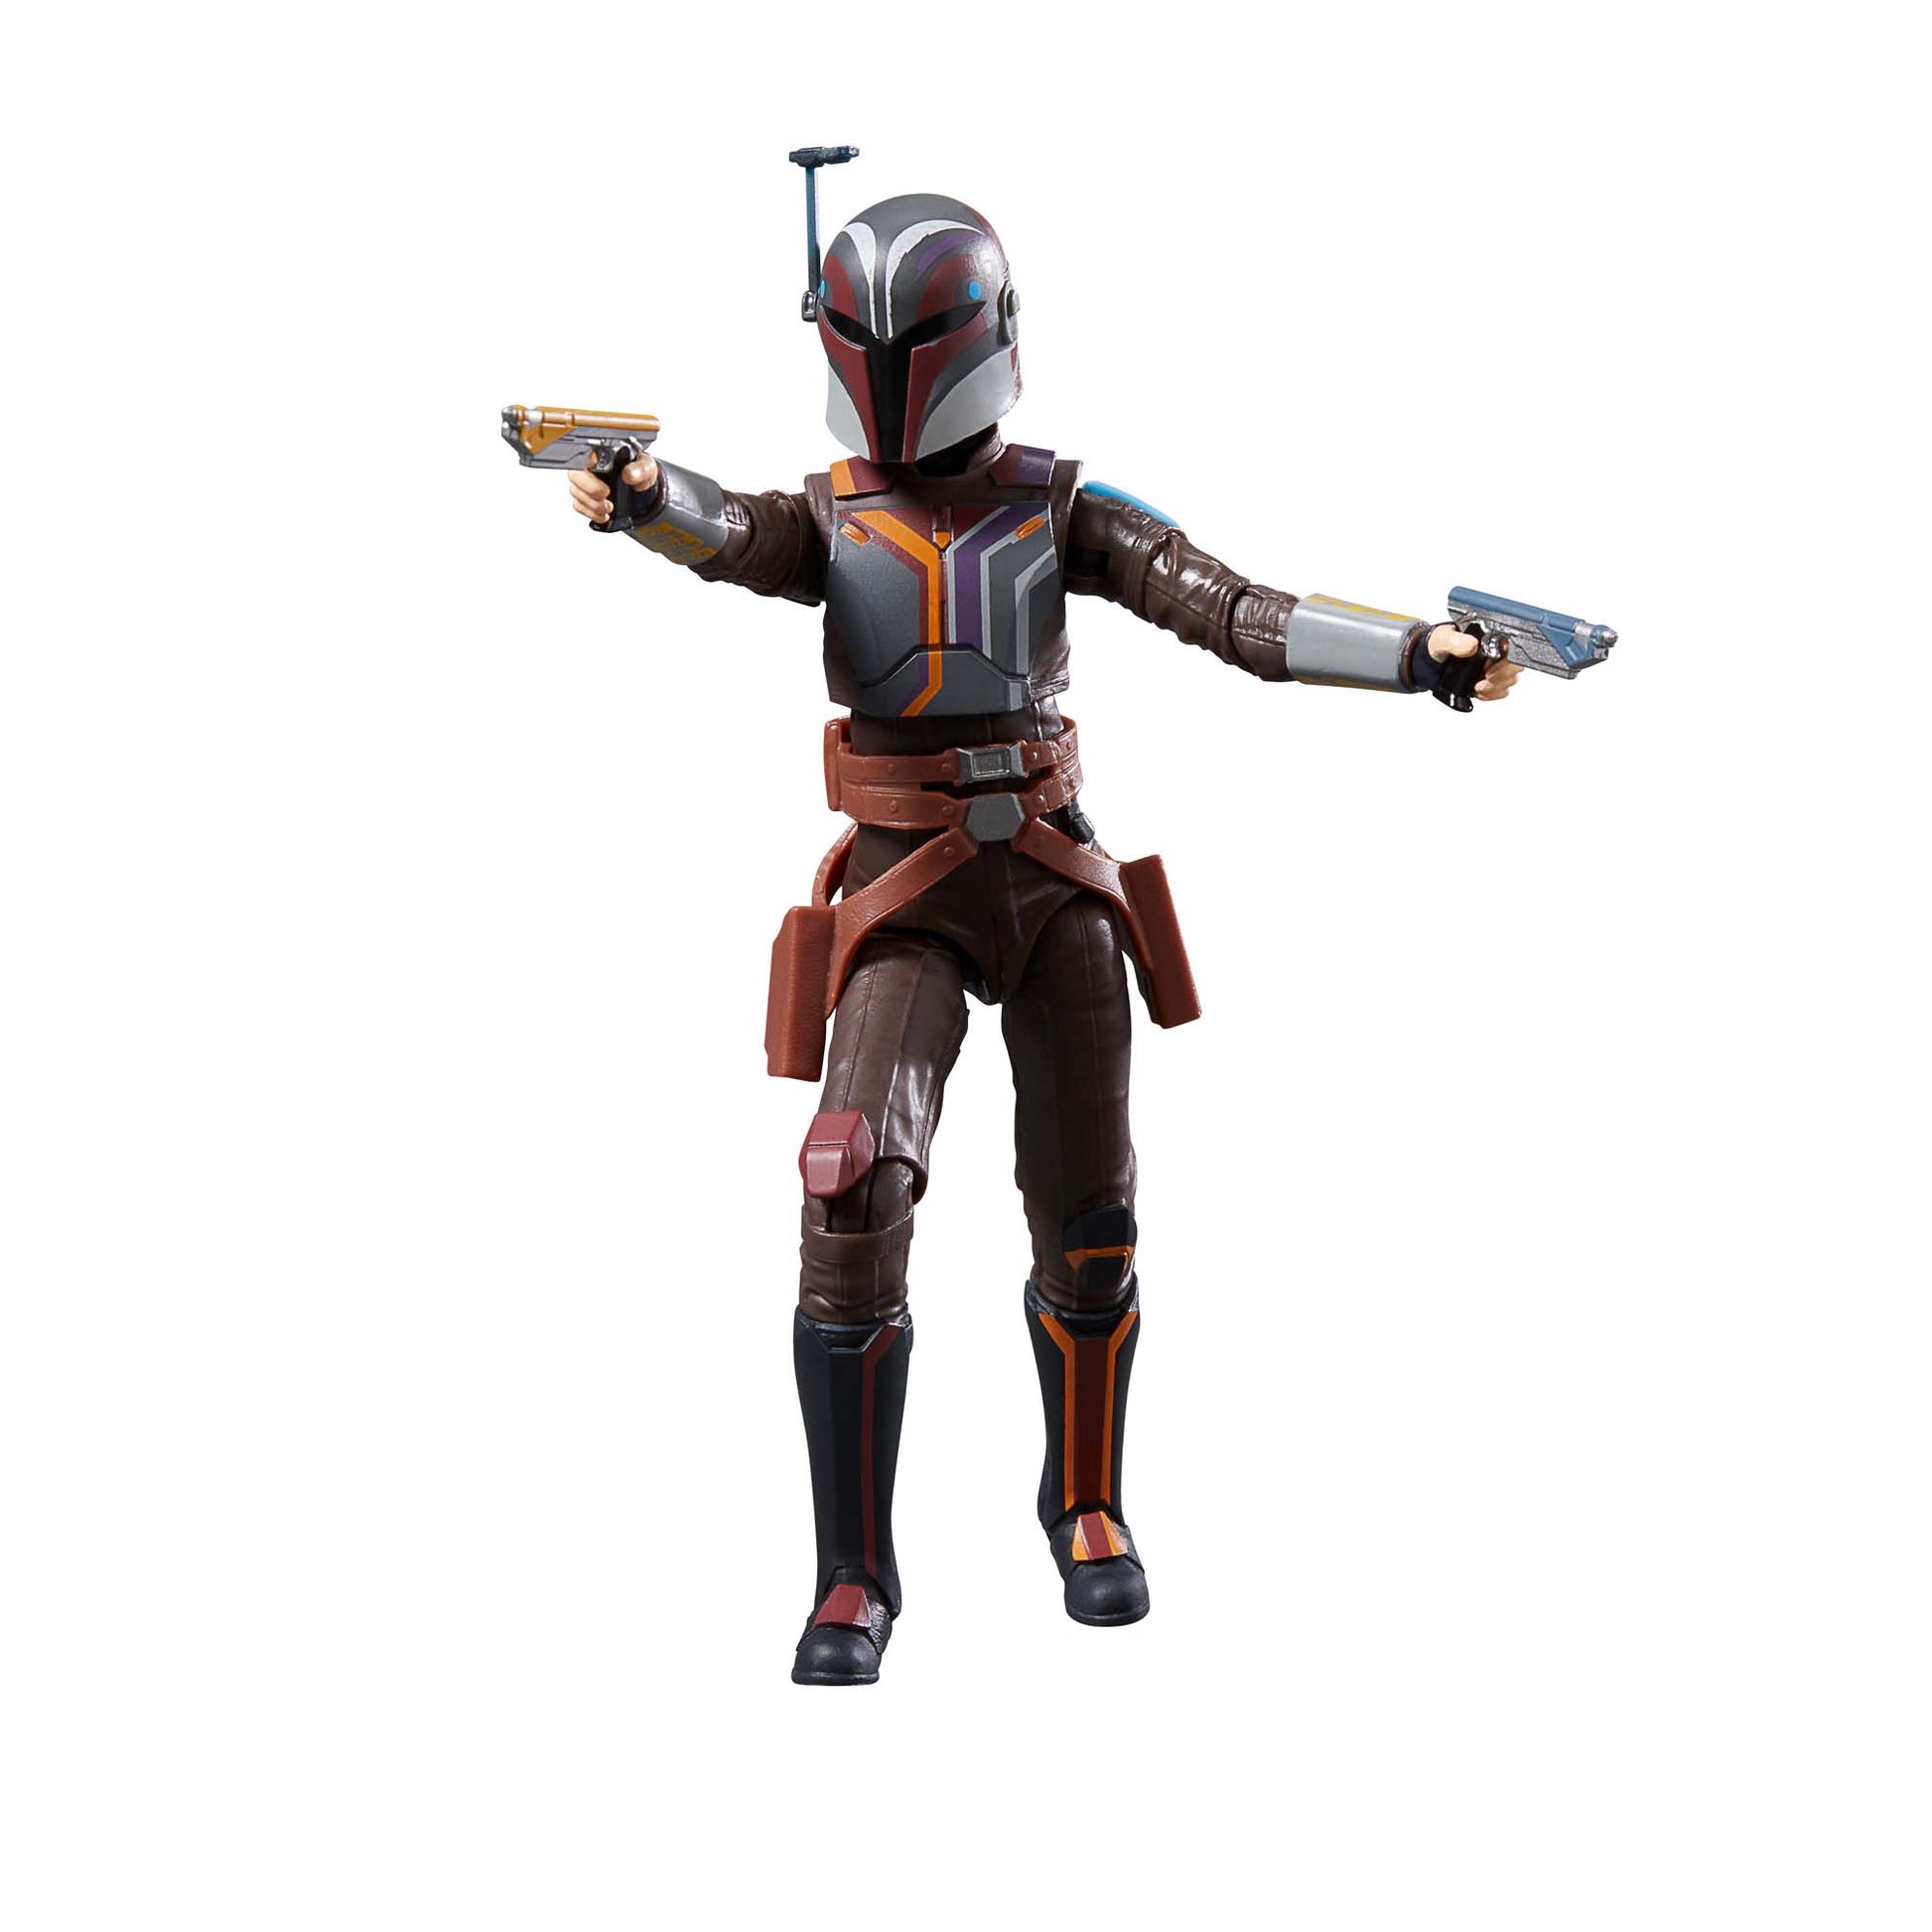 Star Wars The Black Series Sabine Wren 6-Inch Action Figure Toy attacking position - Heretoserveyou